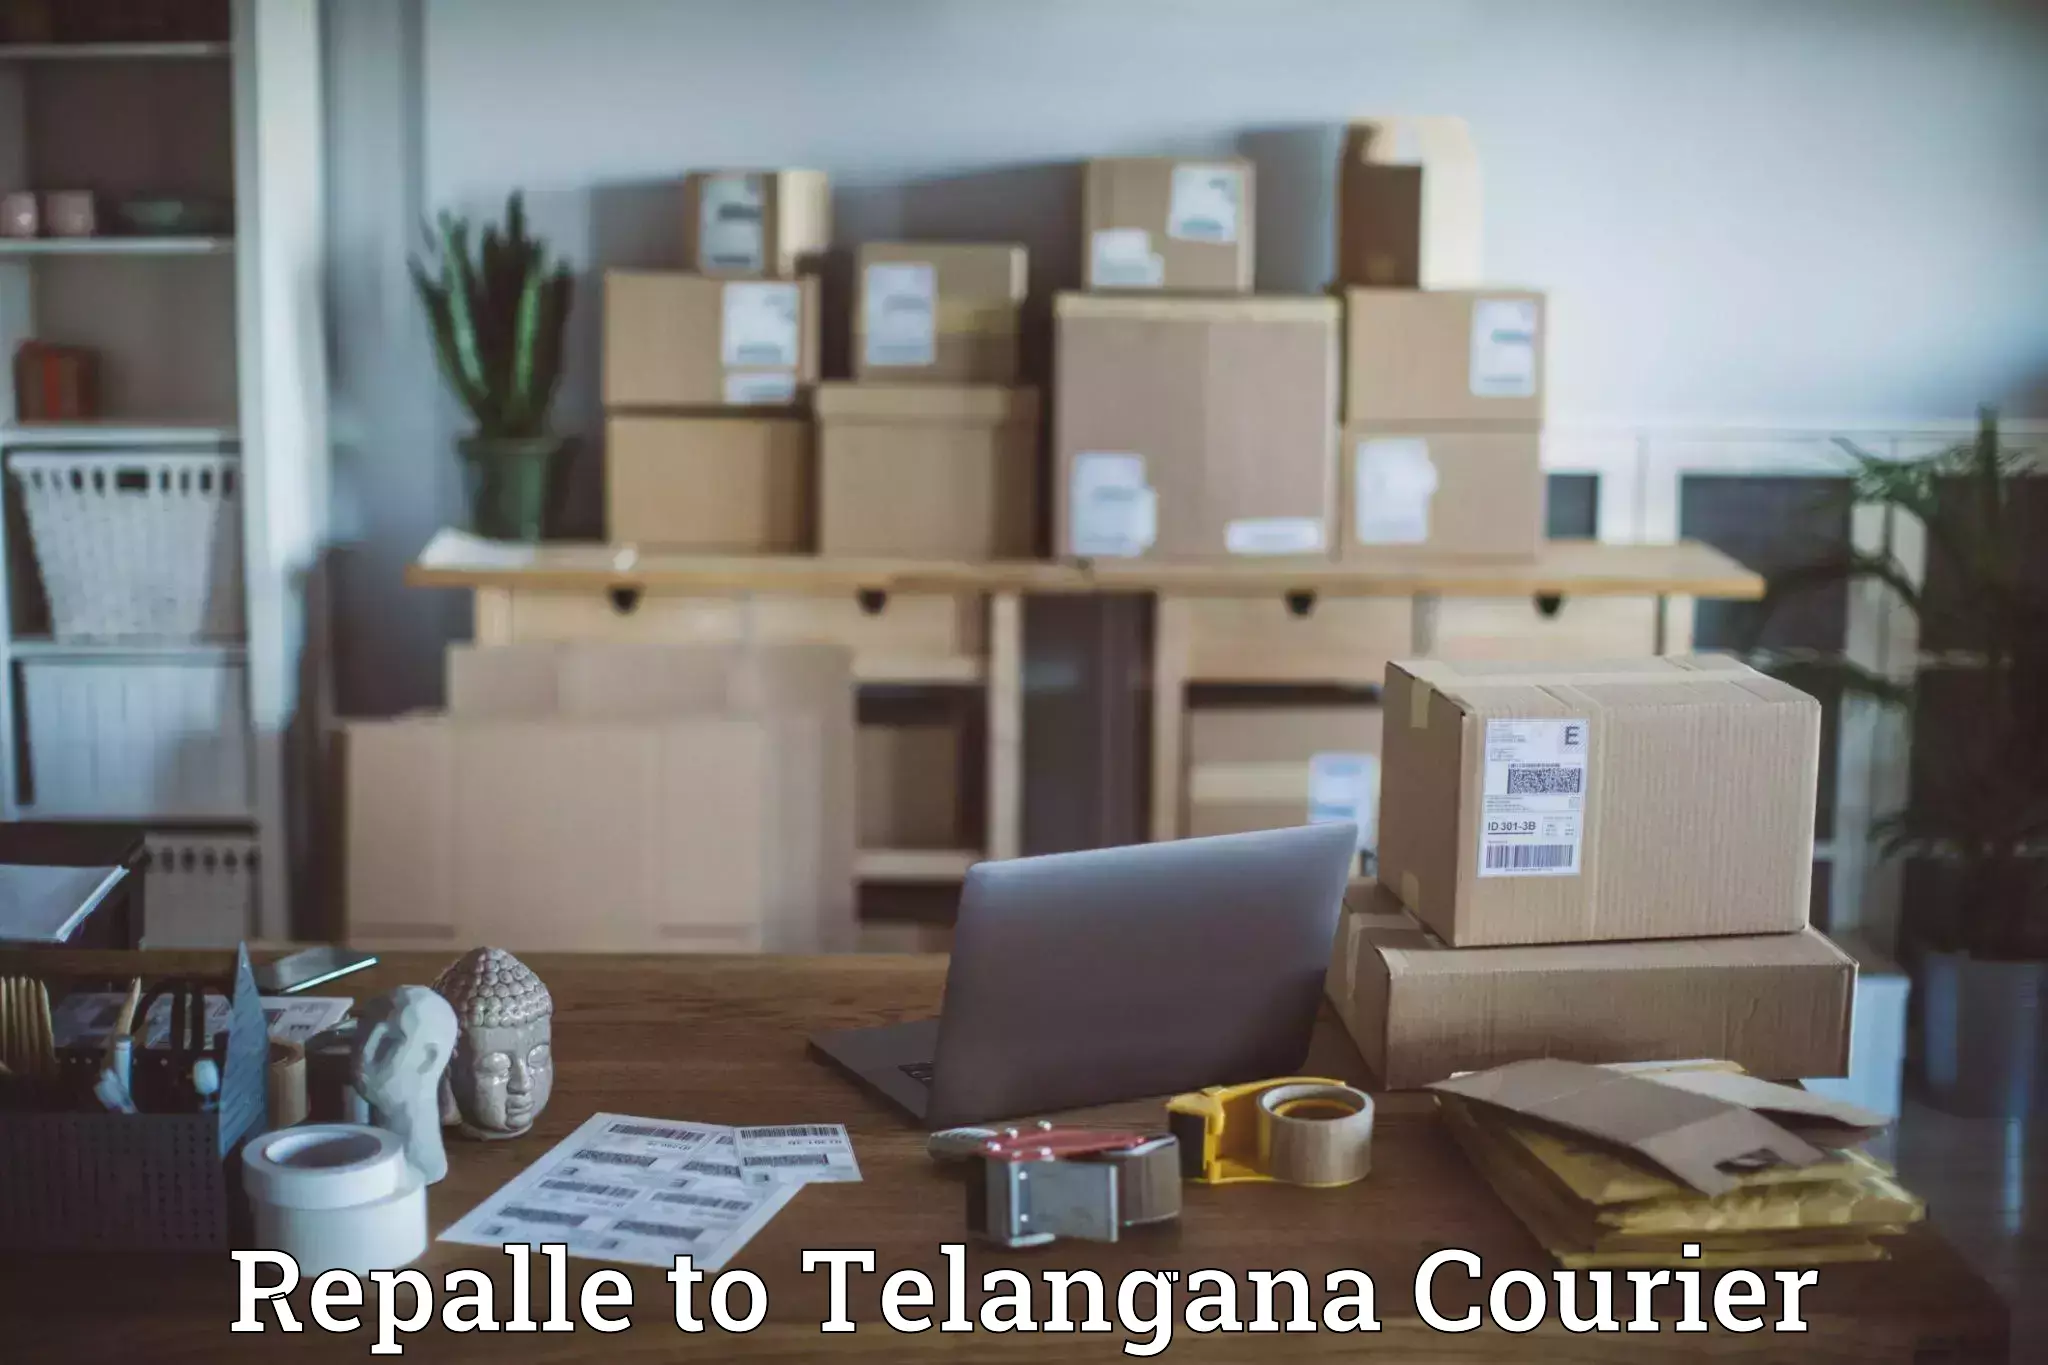 Holiday shipping services Repalle to Alair